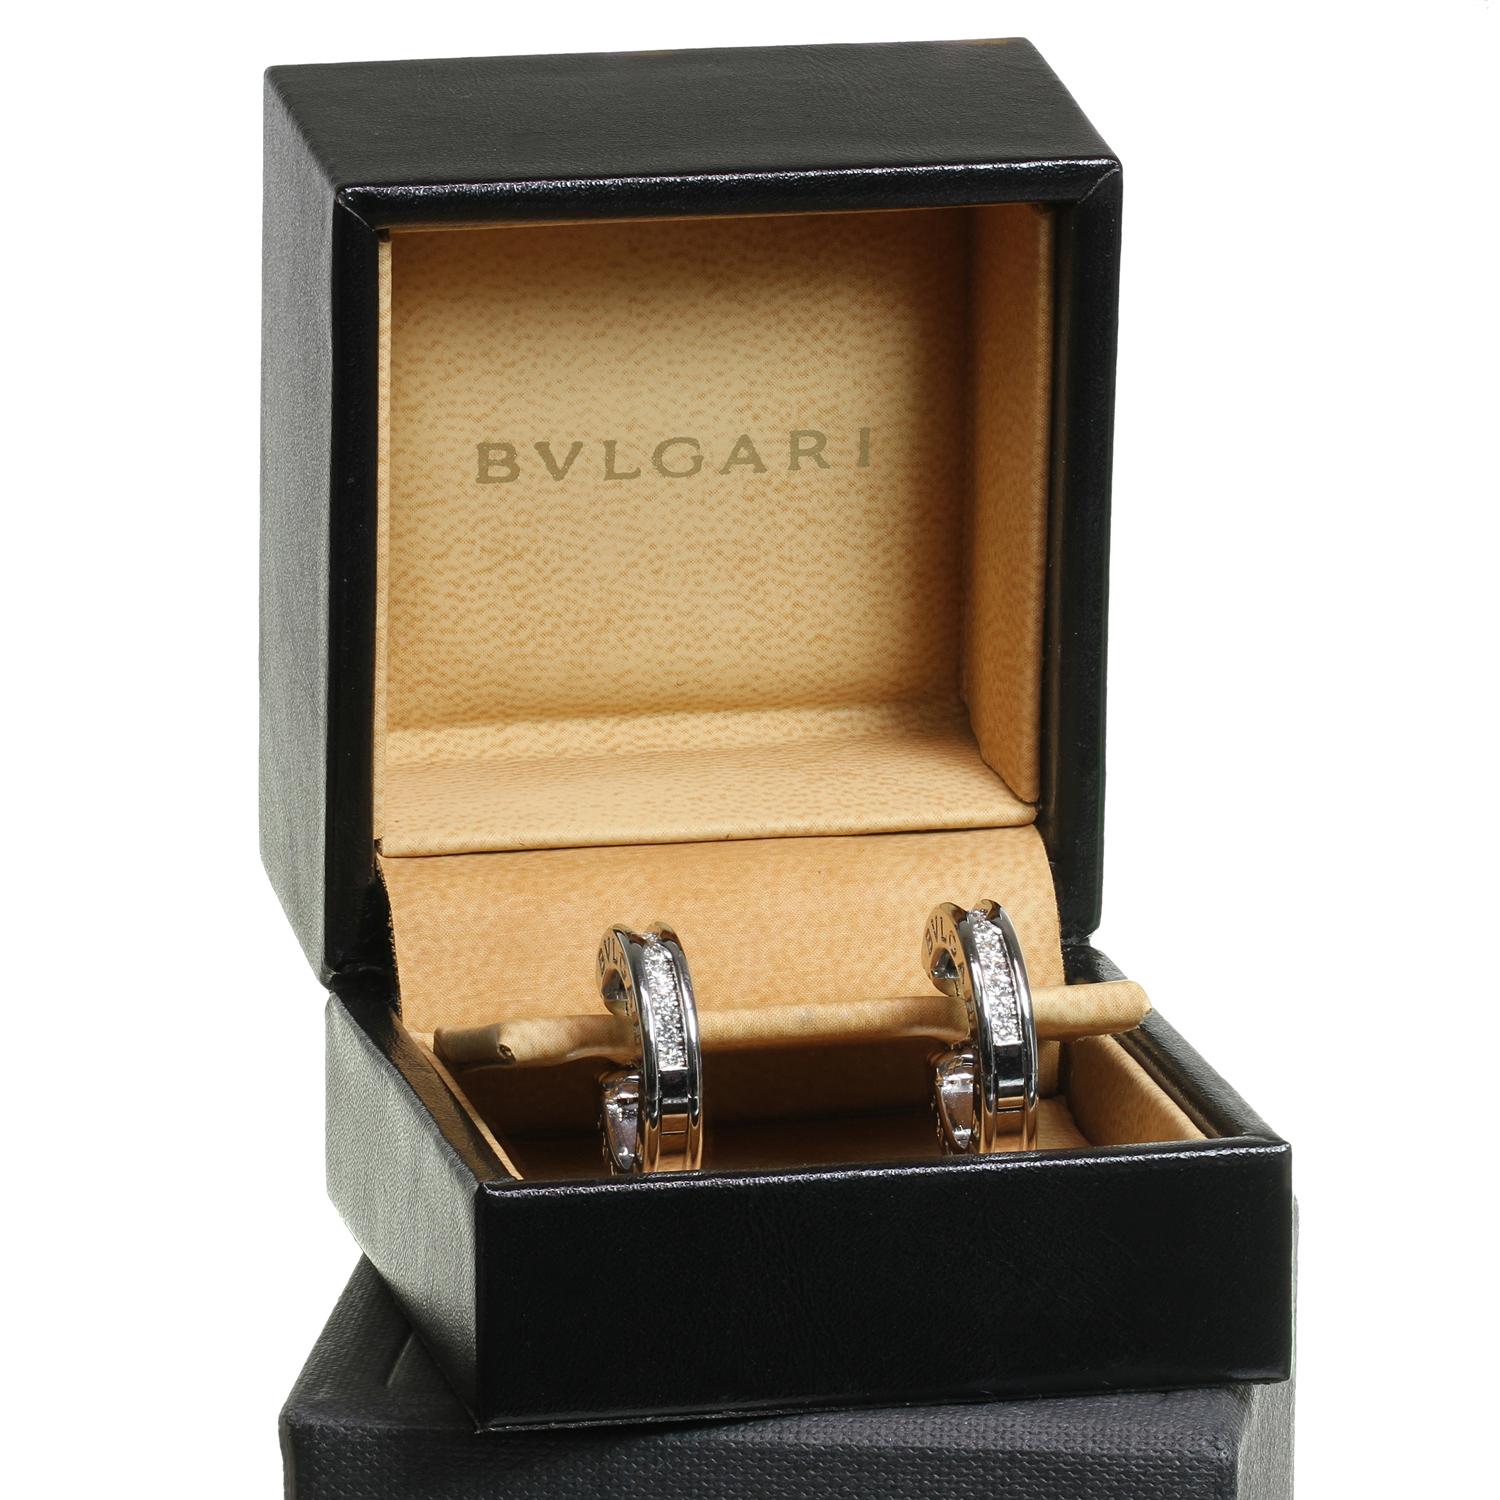 This gorgeous earrings from Bulgari's iconic B.zero1 collection feature a a hoop design crafted in 18k white gold, engraved with the Bvlgari logo on both sides and pave-set with brilliant-cut round E-F-G VVS2-VS1 diamonds weighing an estimated 0.60